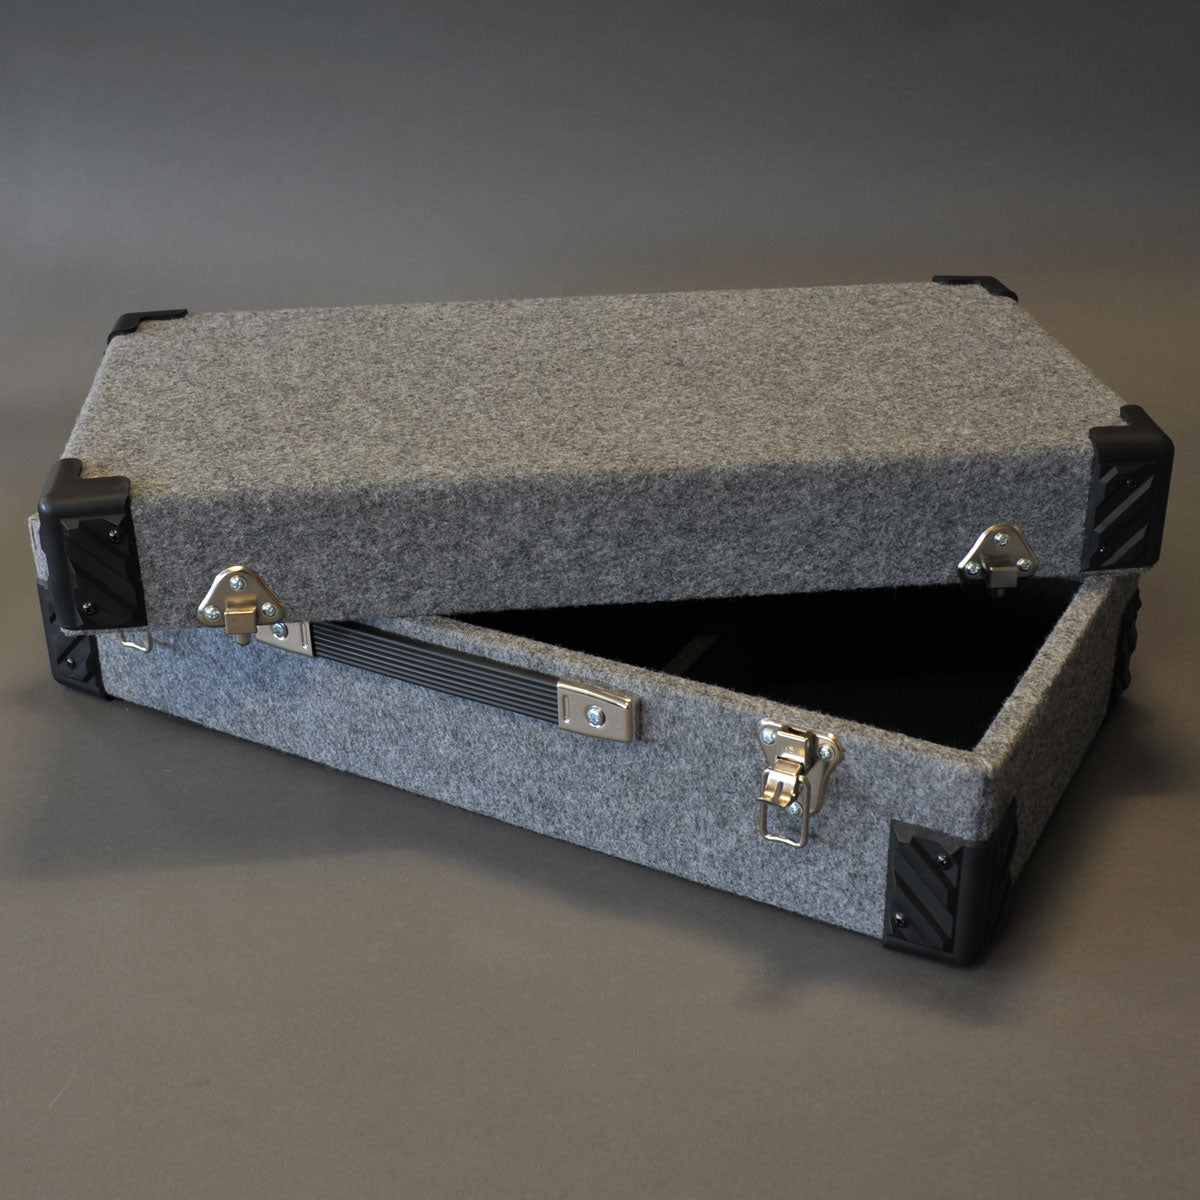 WOODEN TRUNK COVERED WITH BLACK FABRIC FOR 300 RECORD 45 RPM 7 INCHES